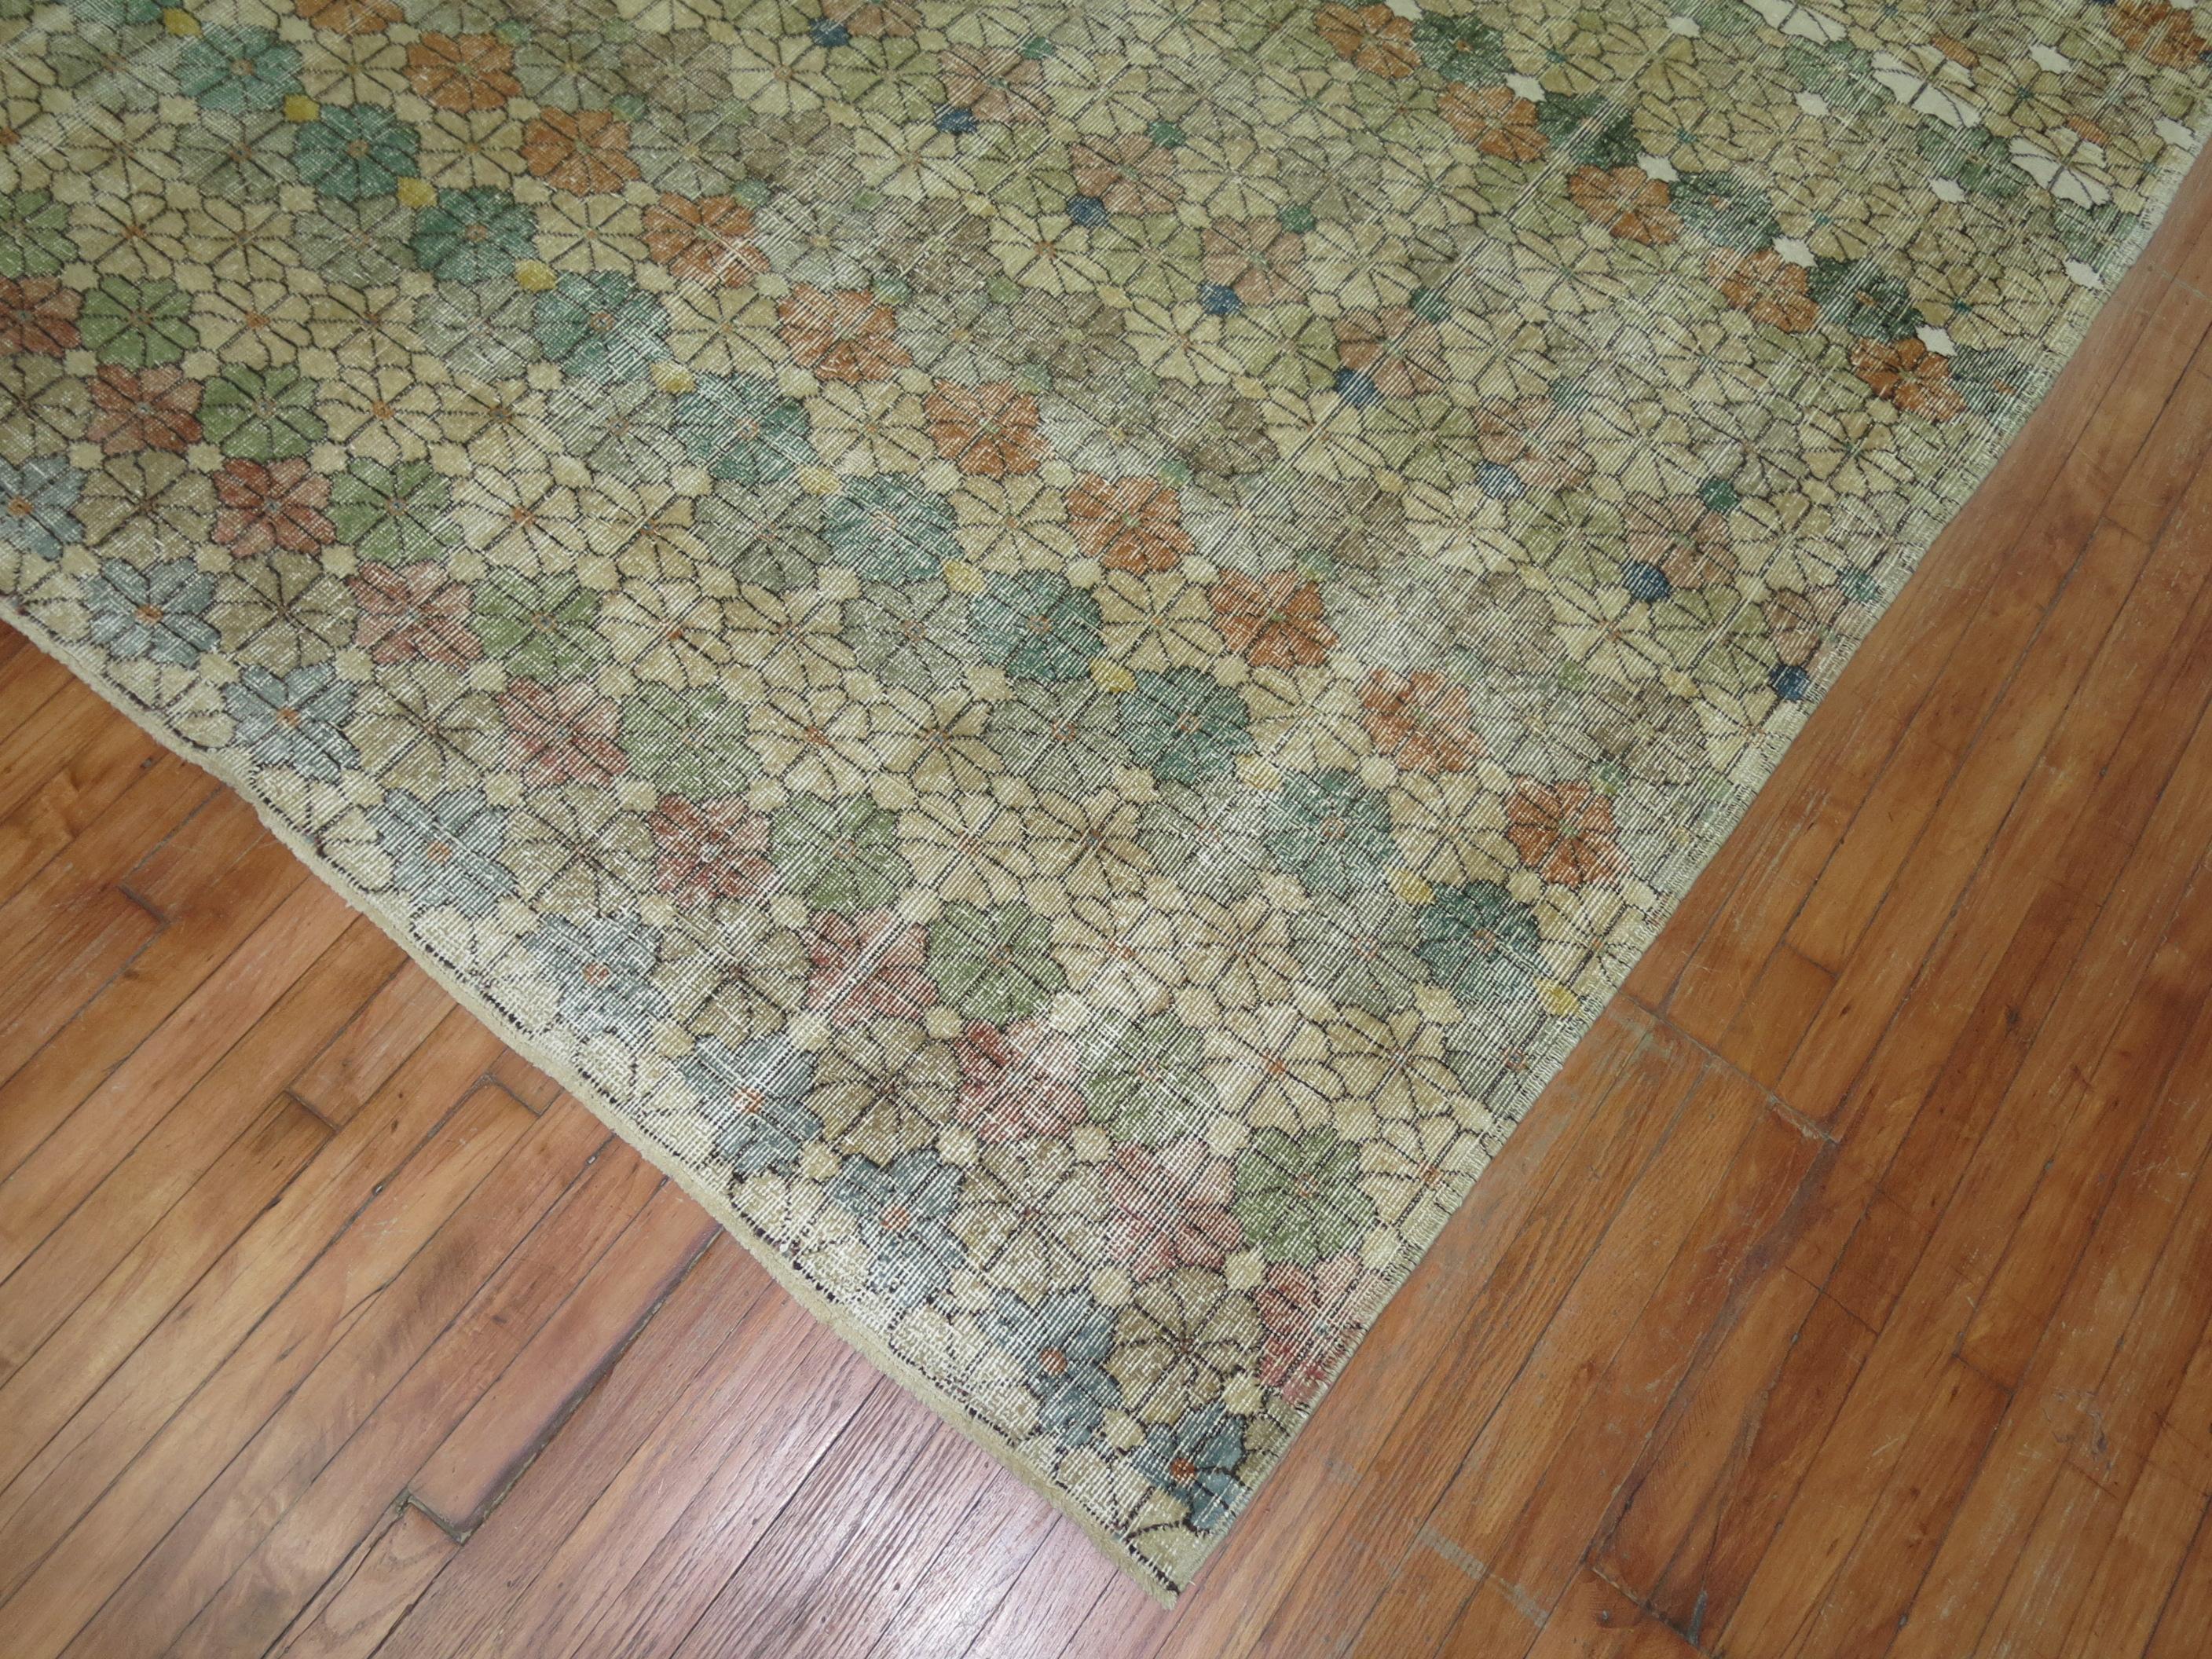 Worn Turkish Deco Rug In Fair Condition For Sale In New York, NY